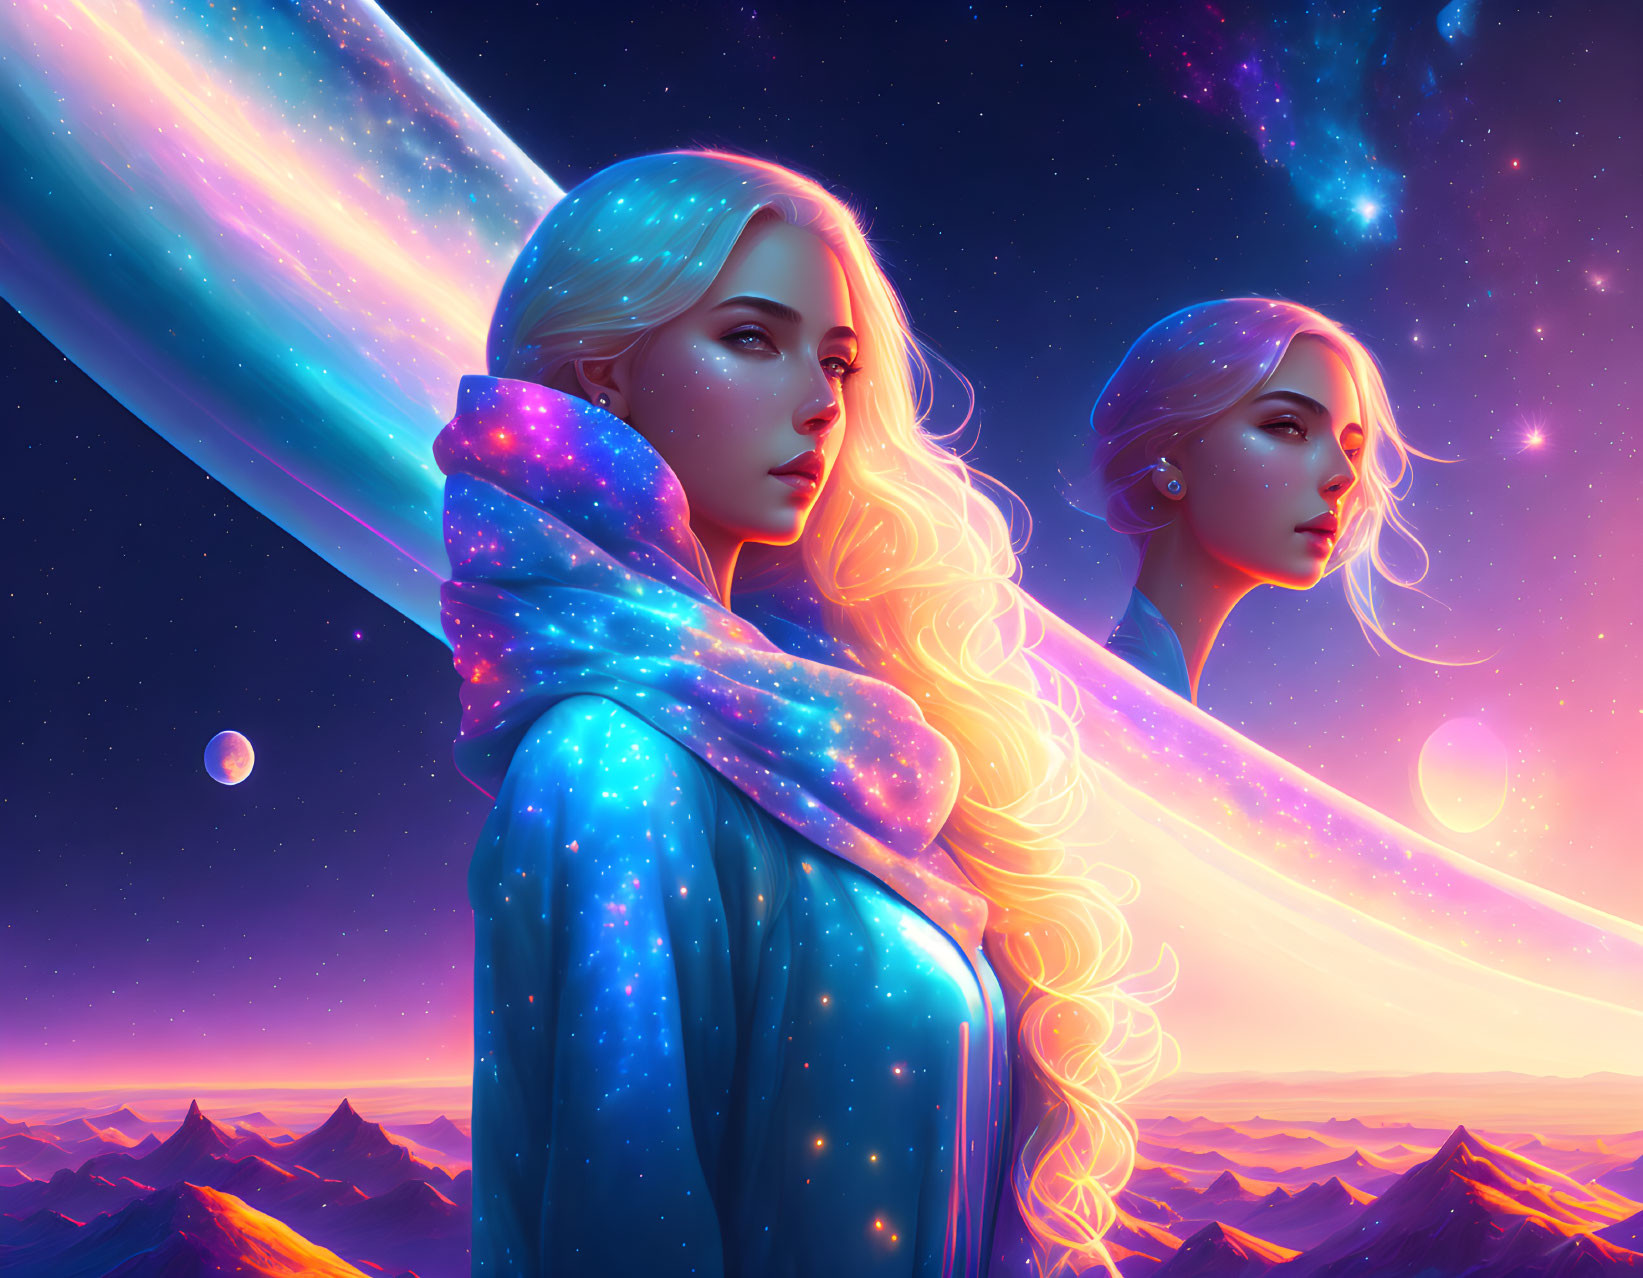 Two women with luminescent hair in starry night setting.